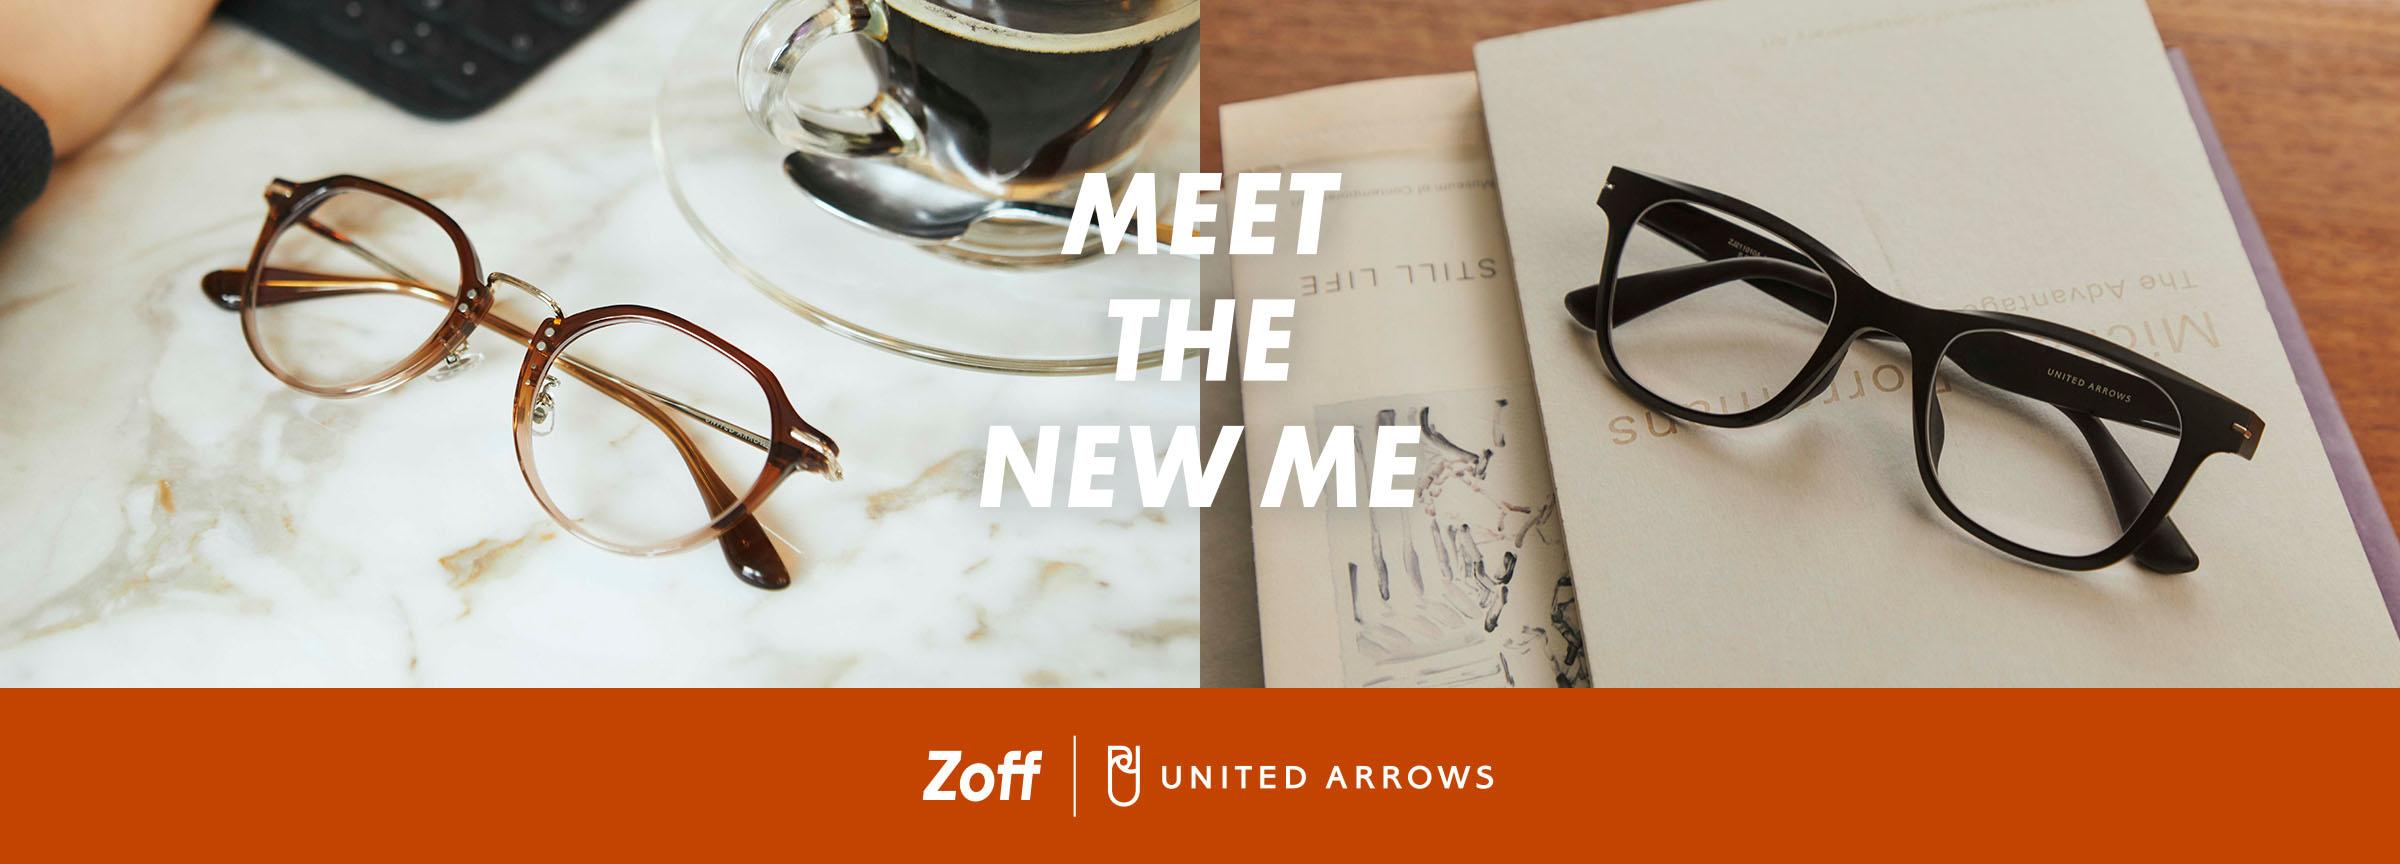 MEET THE NEW ME - Zoff | United Arrows